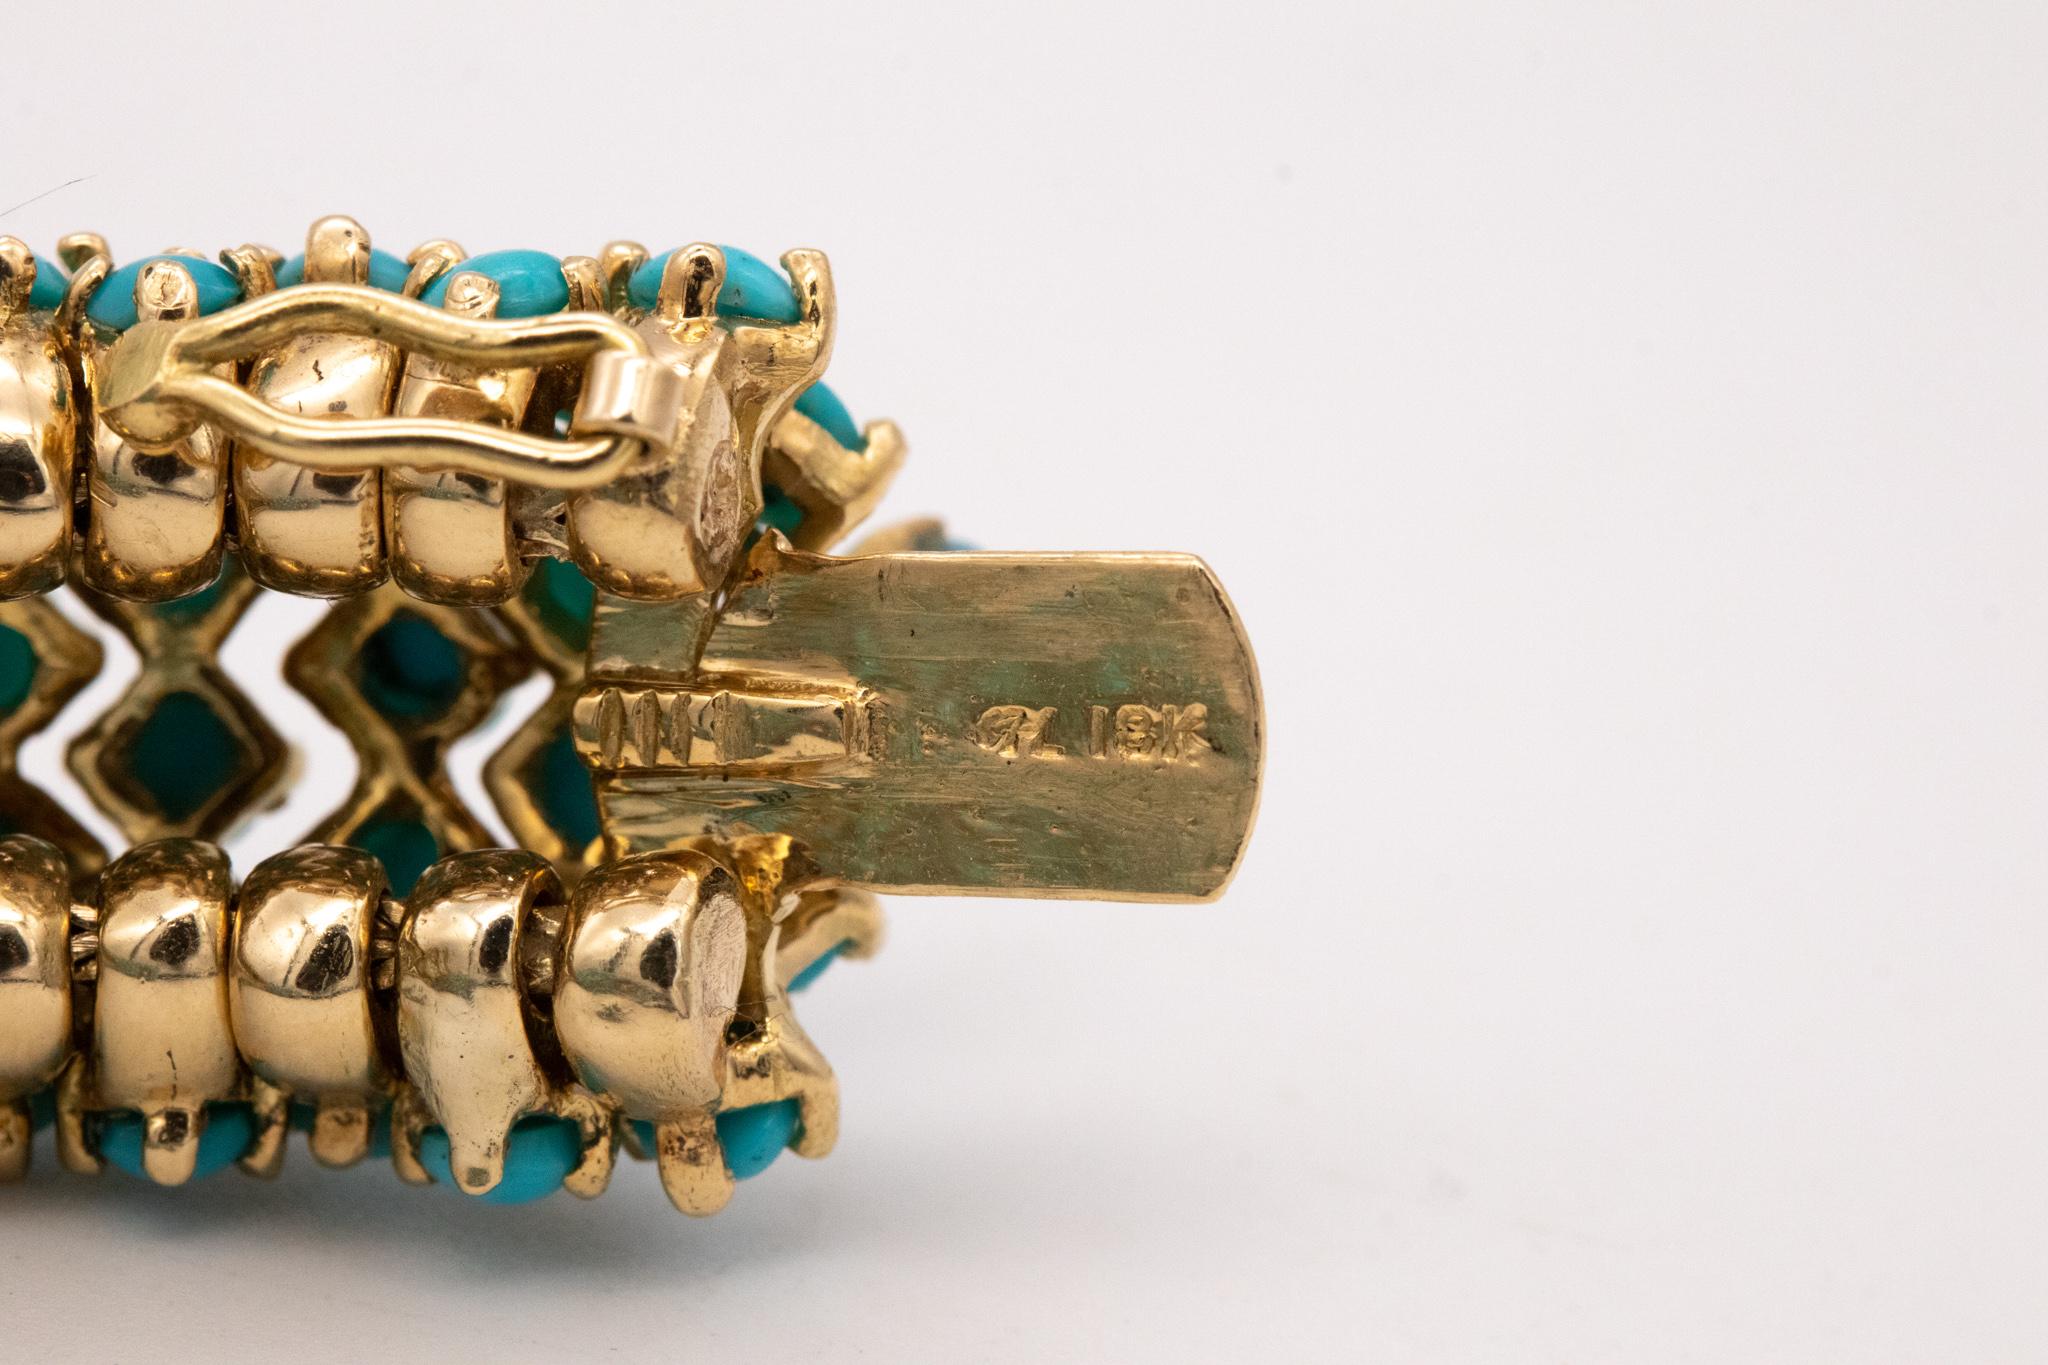 Cabochon Hammerman Brothers 1960 Bracelet in 18Kt Gold with 35.7 Ctw Turquoises Diamonds